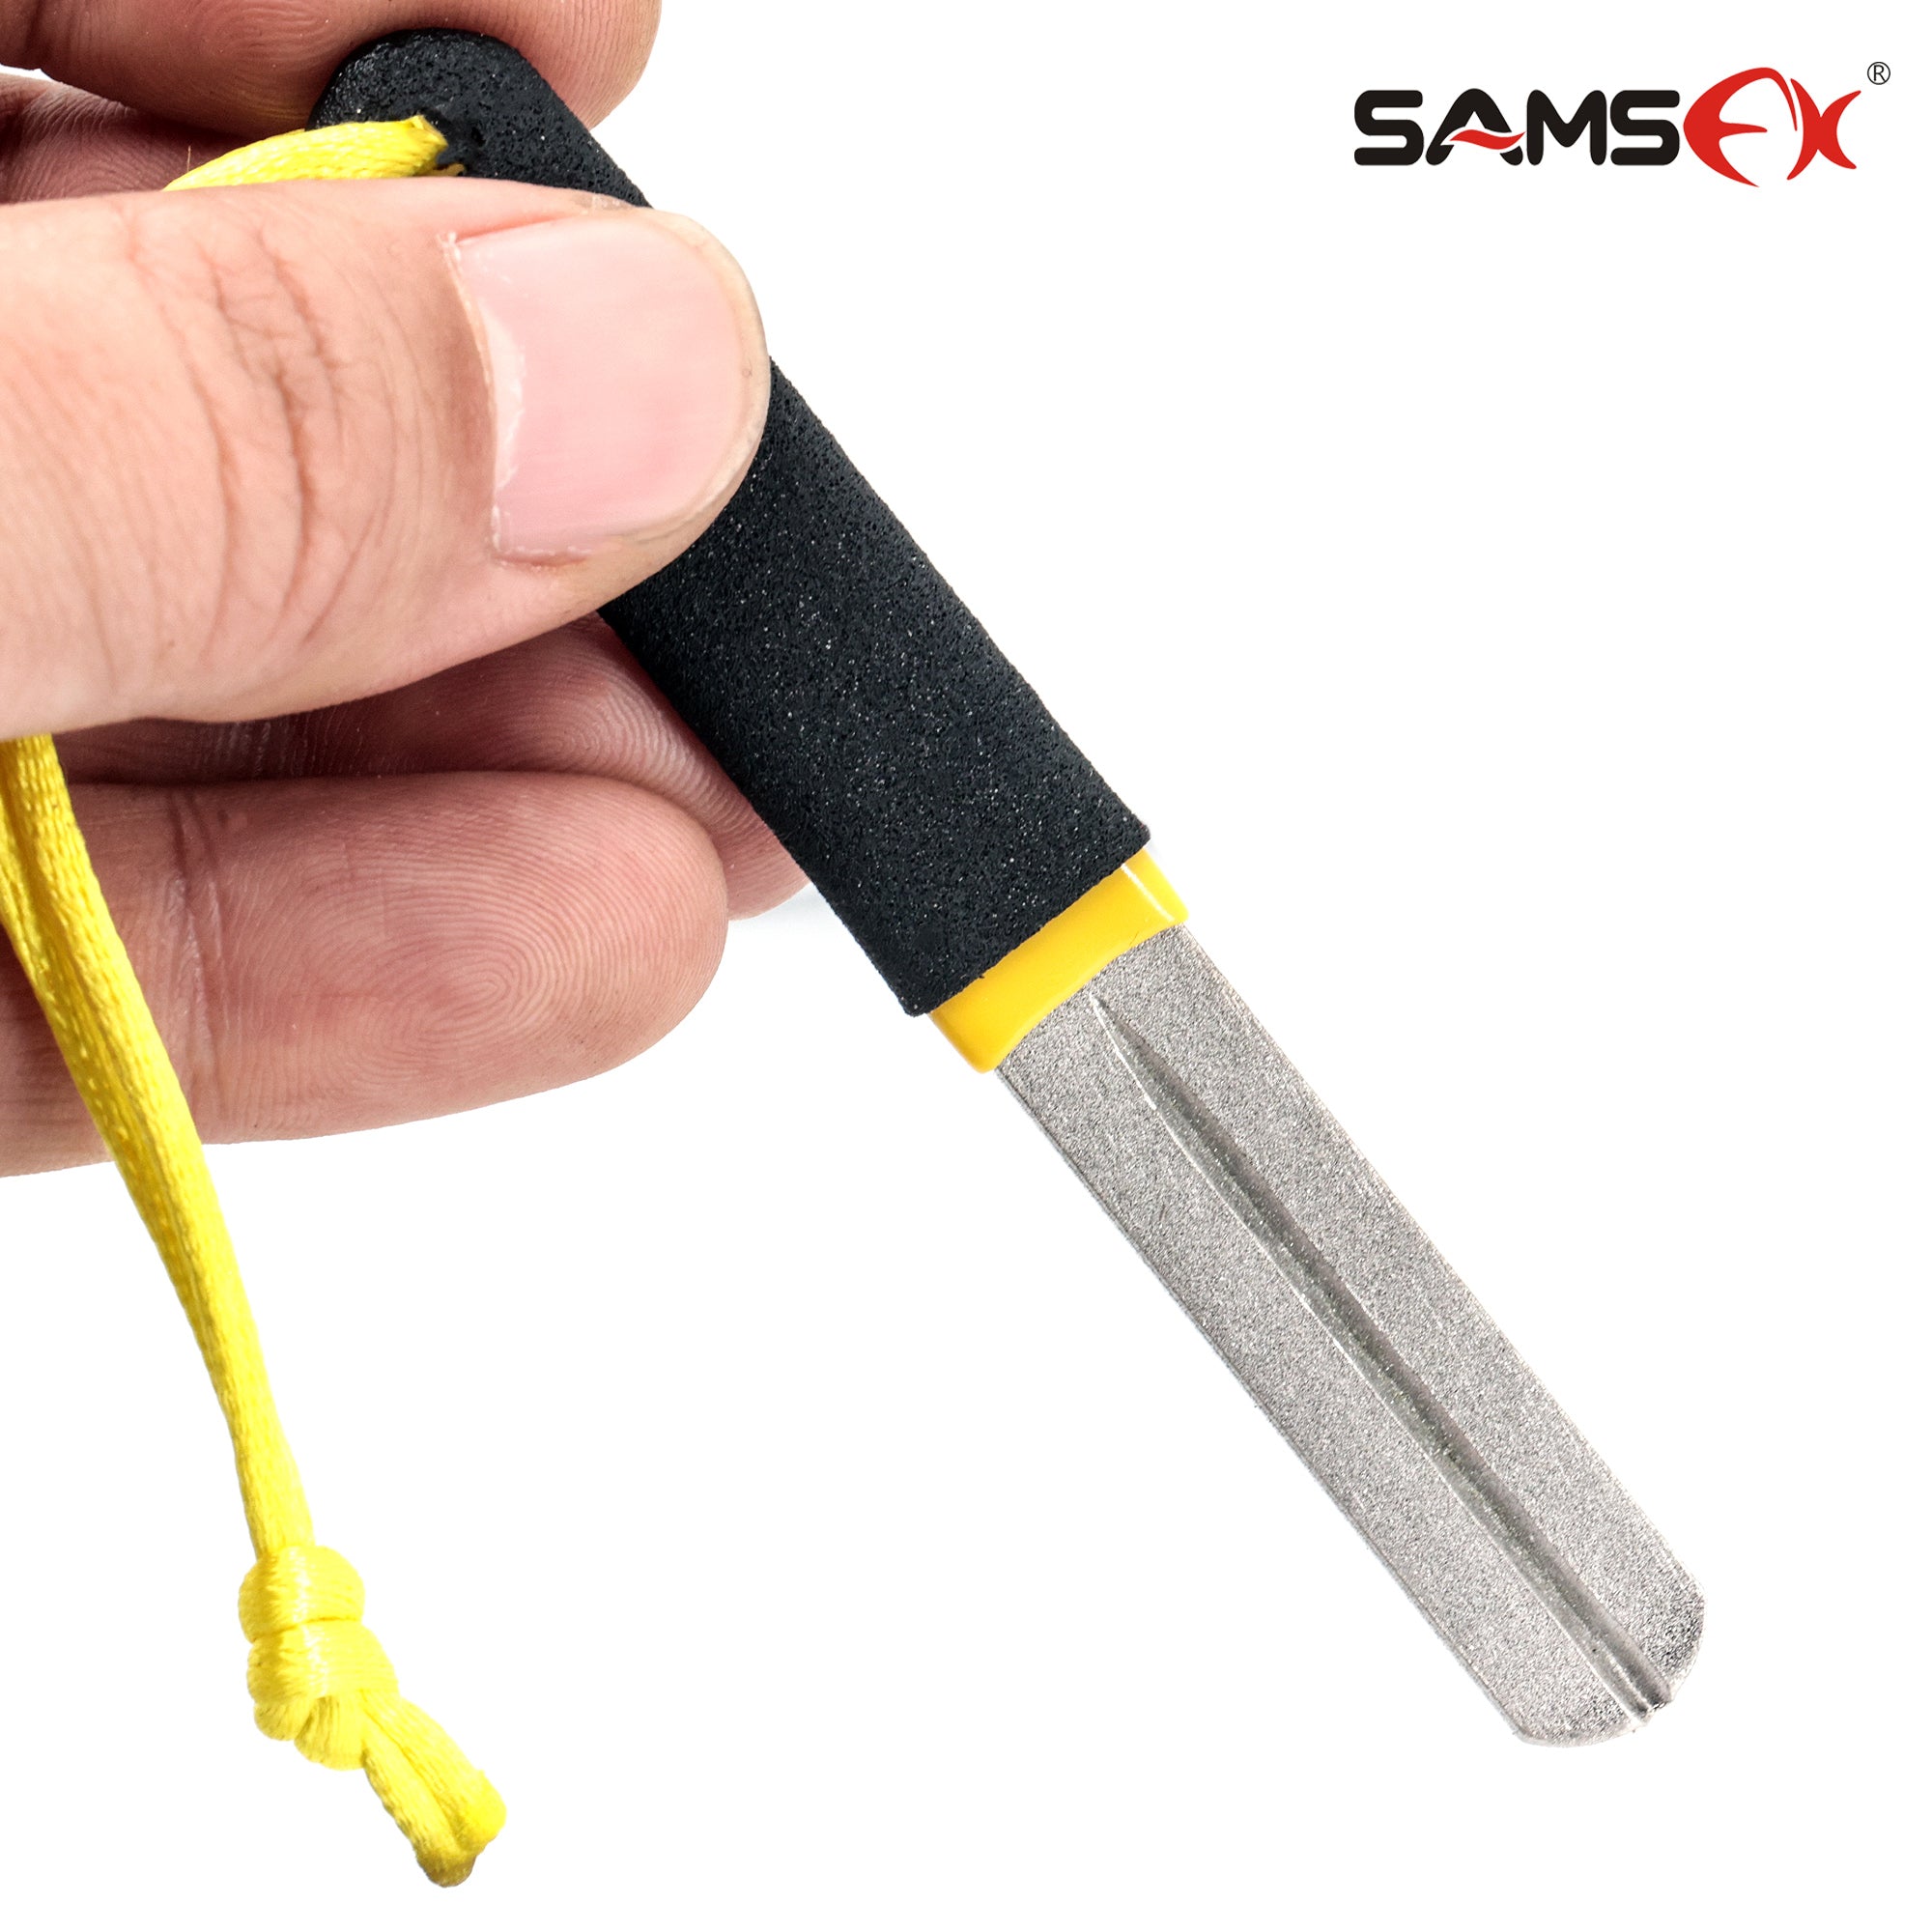 SAMSFX 2 x Snelled Fishing Hook Remover 2 Sizes Hooks Disgorger